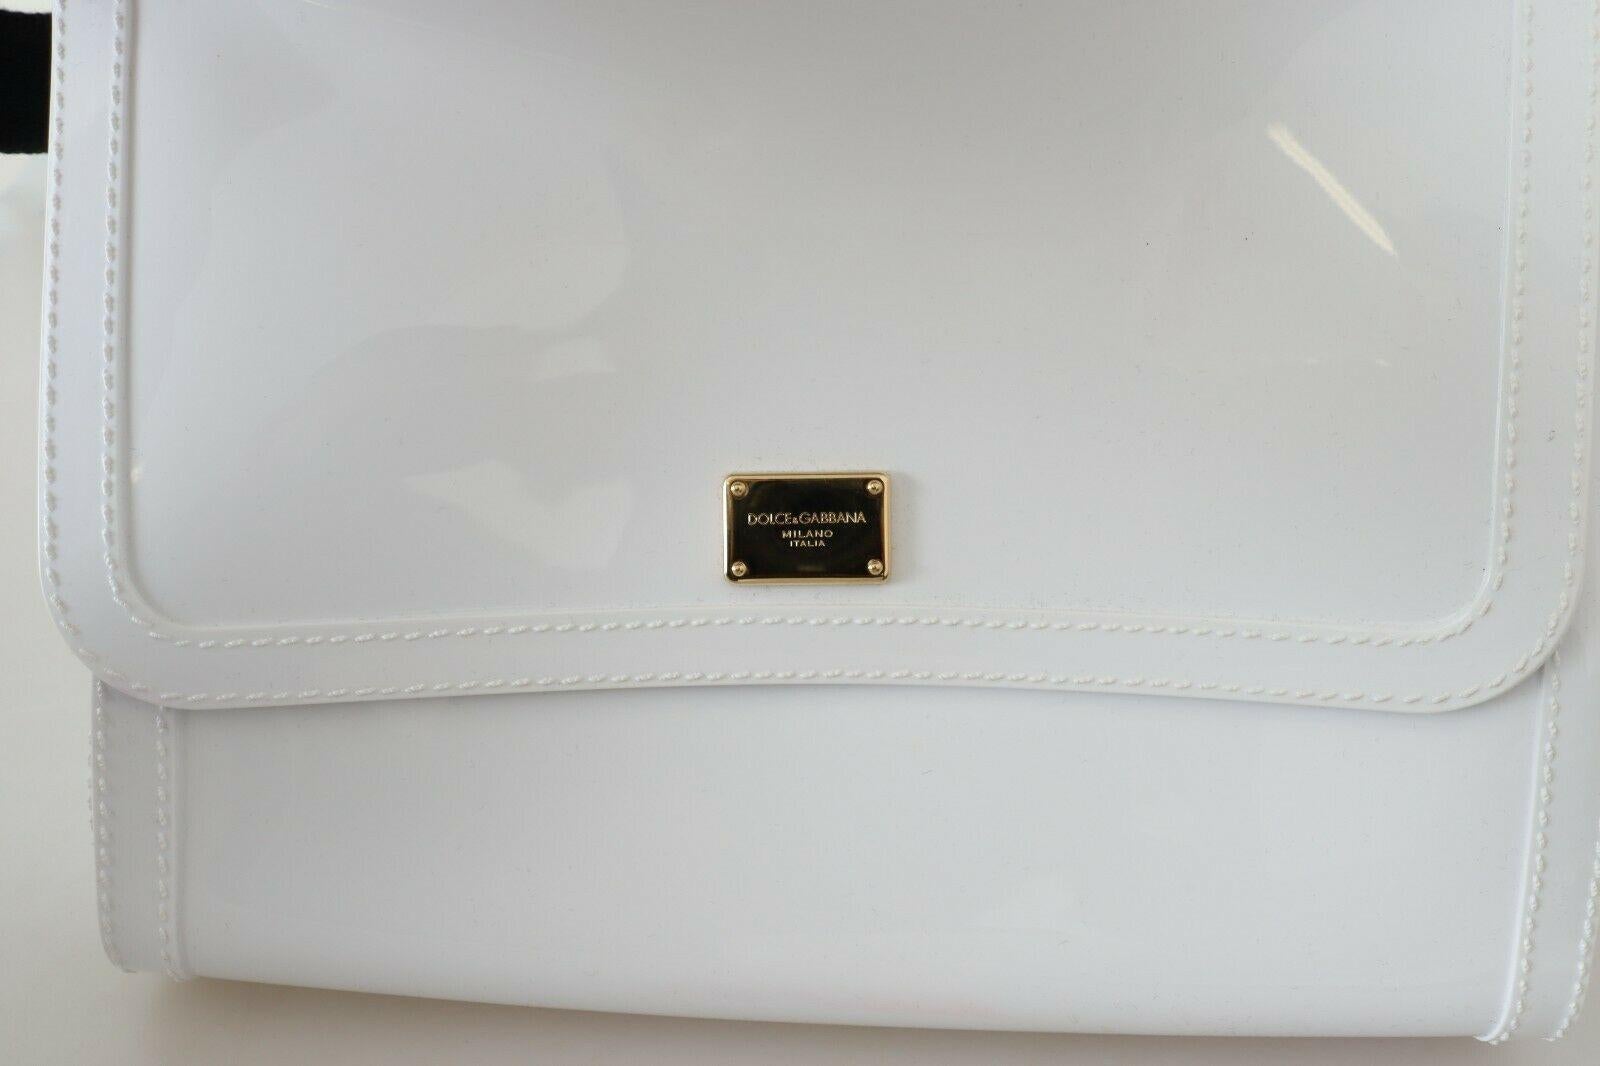 Dolce & Gabbana White Gold PVC Leather Sicily Top Handle Handbag Shoulder Bag In New Condition For Sale In WELWYN, GB